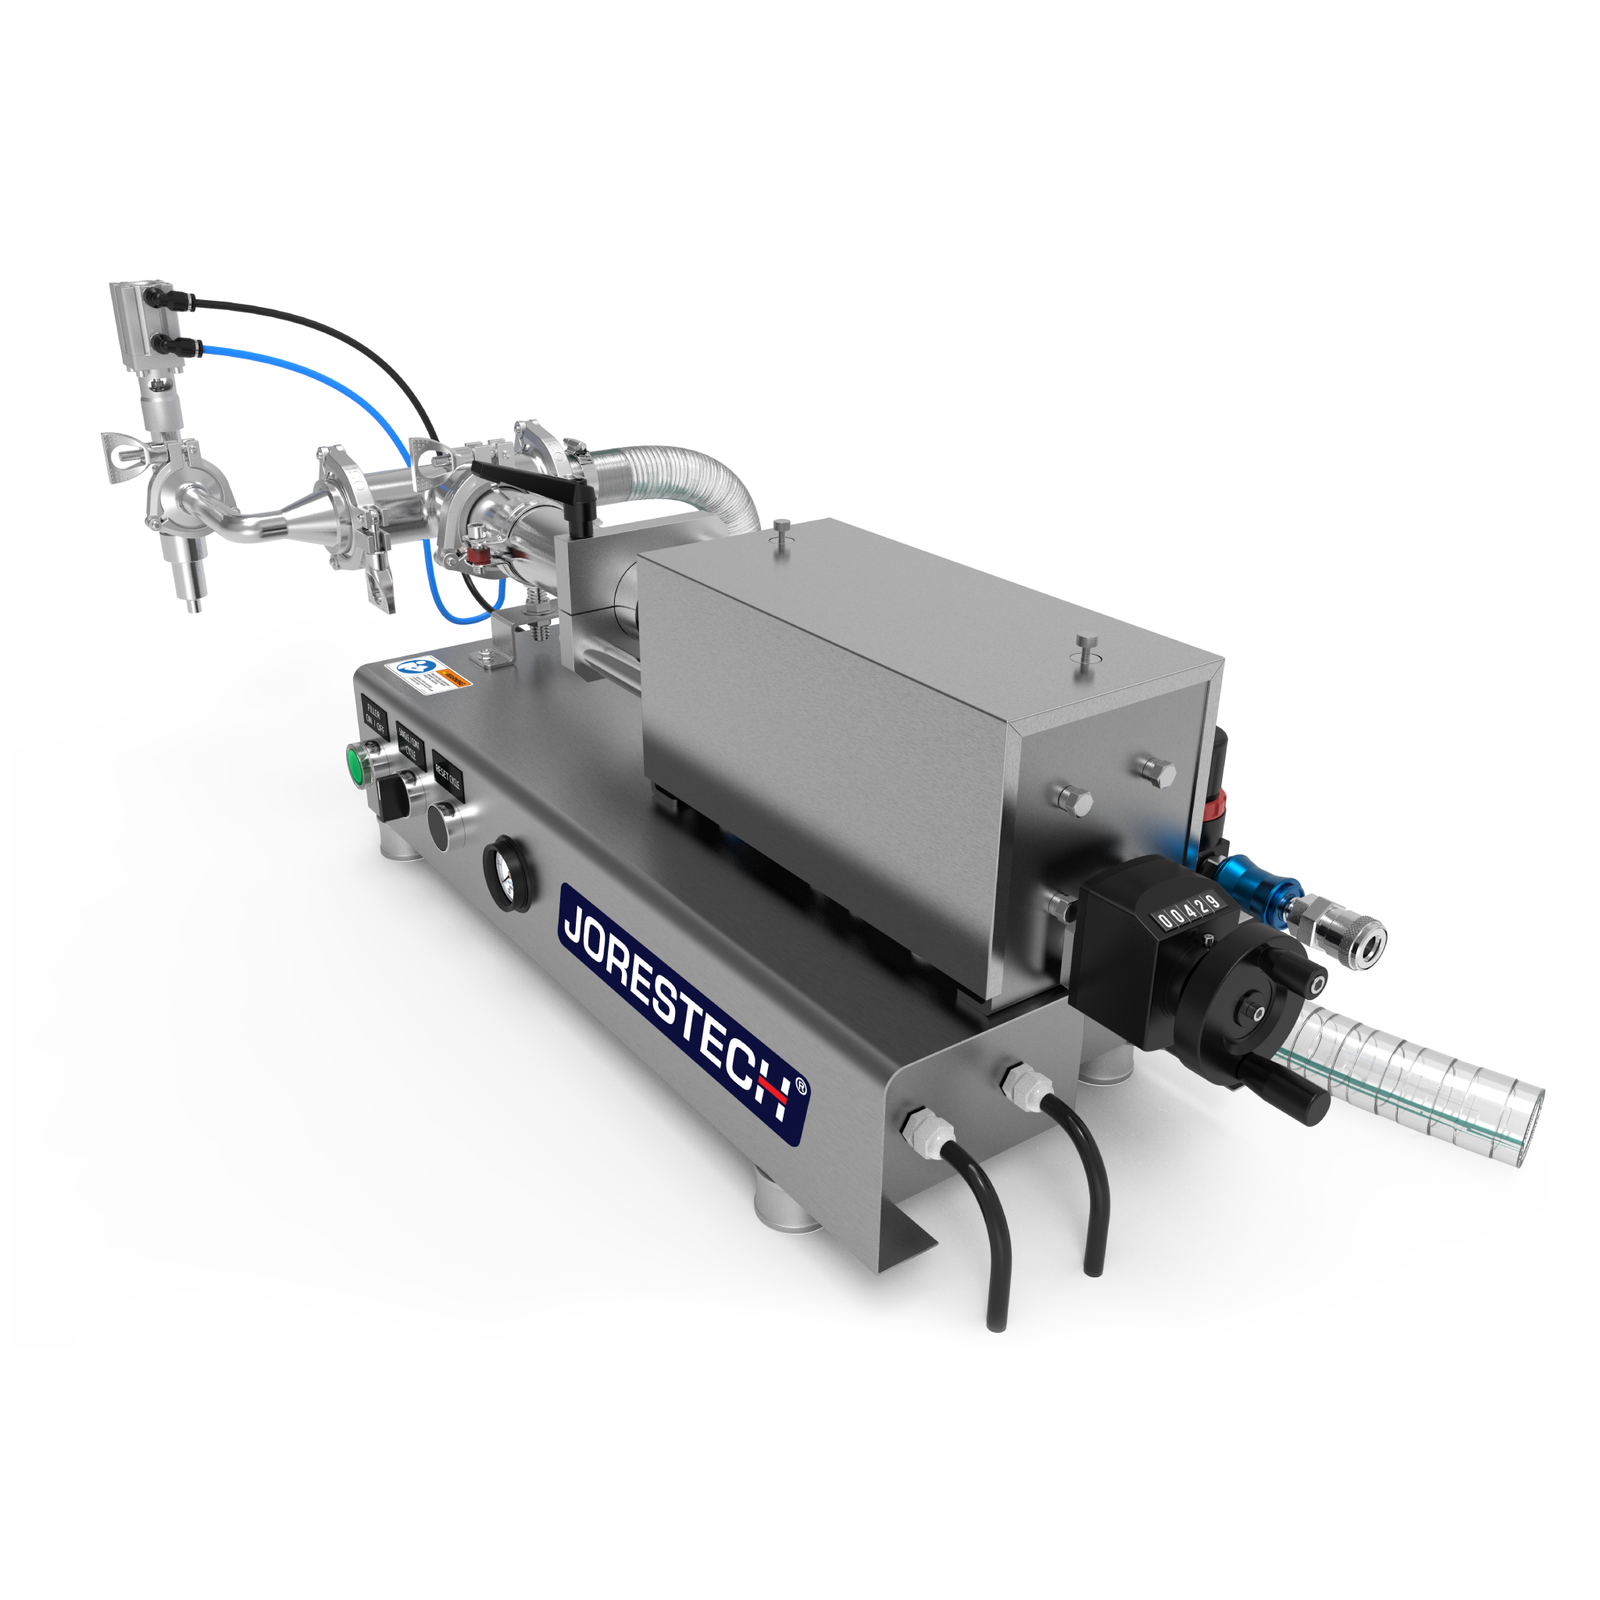 Low viscosity JORES TECHNOLOGIES® liquid filling machine shown from the back. The fill volume adjuster, main input hose, and compressed air connector can be easily appreciated.